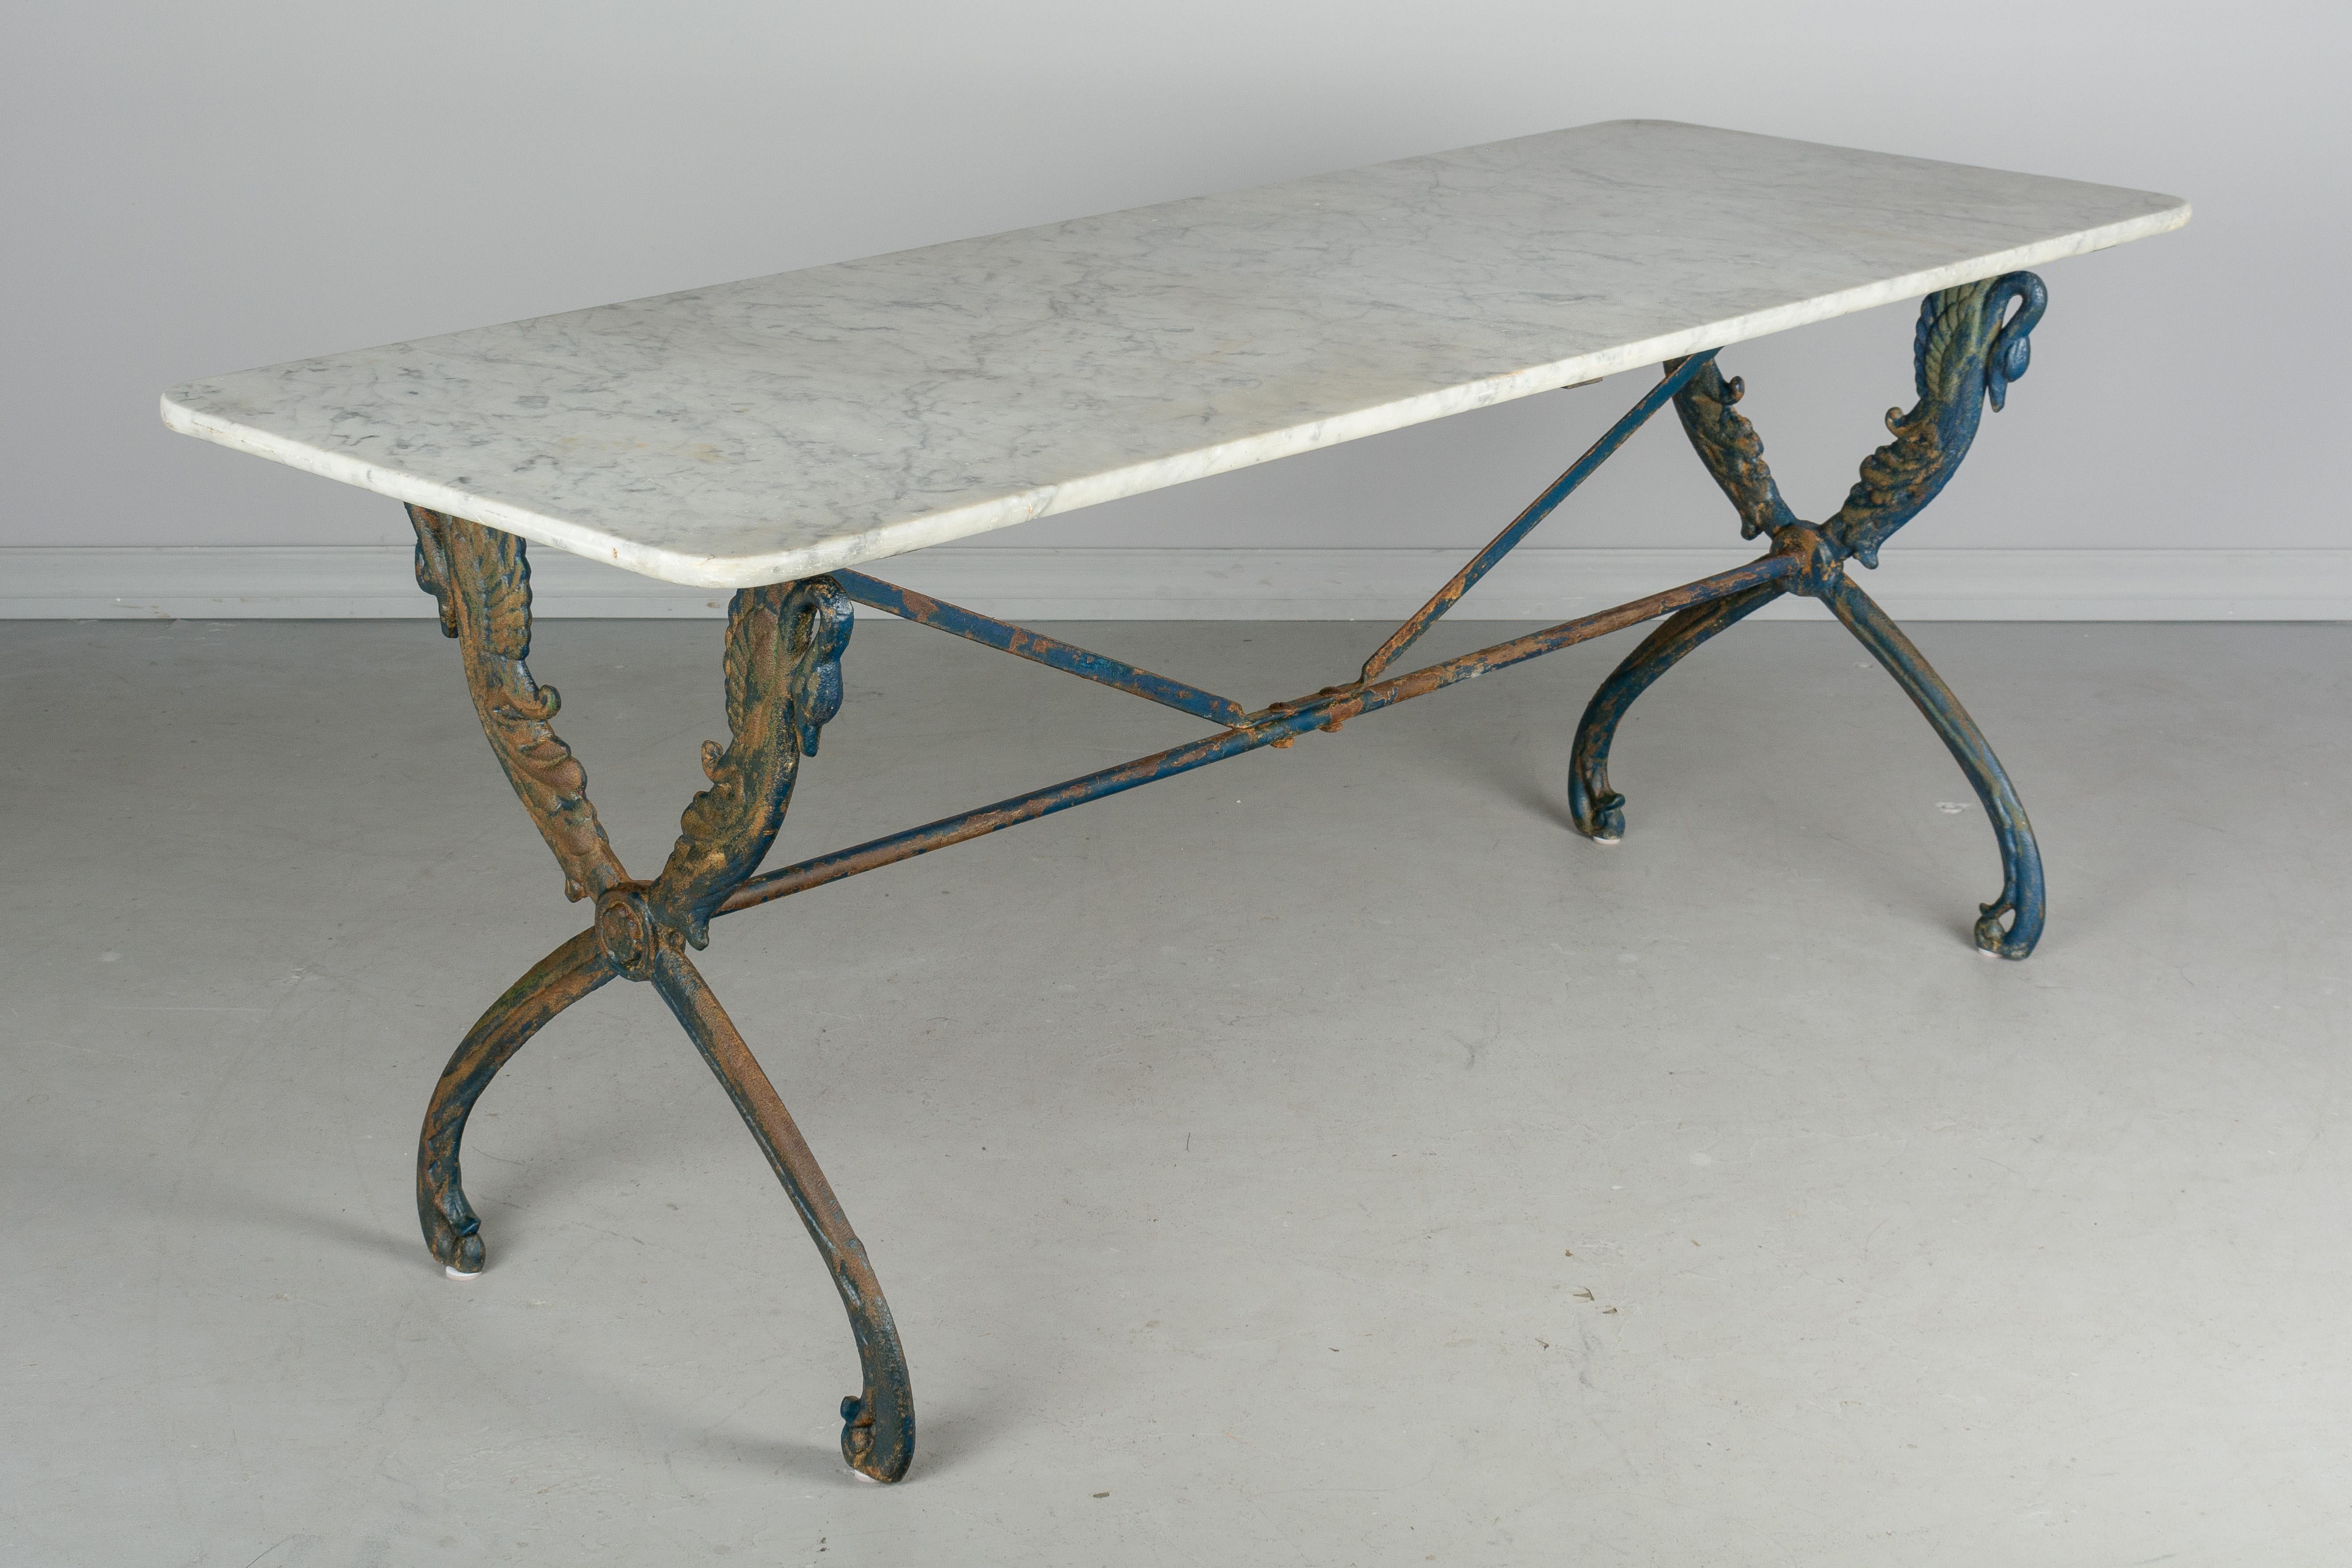 A 19th century French cast iron bistro table with marble top. Nice casting with stylized swan motif and unusual blue painted finish with old rusted patina. White veined marble top is as found.